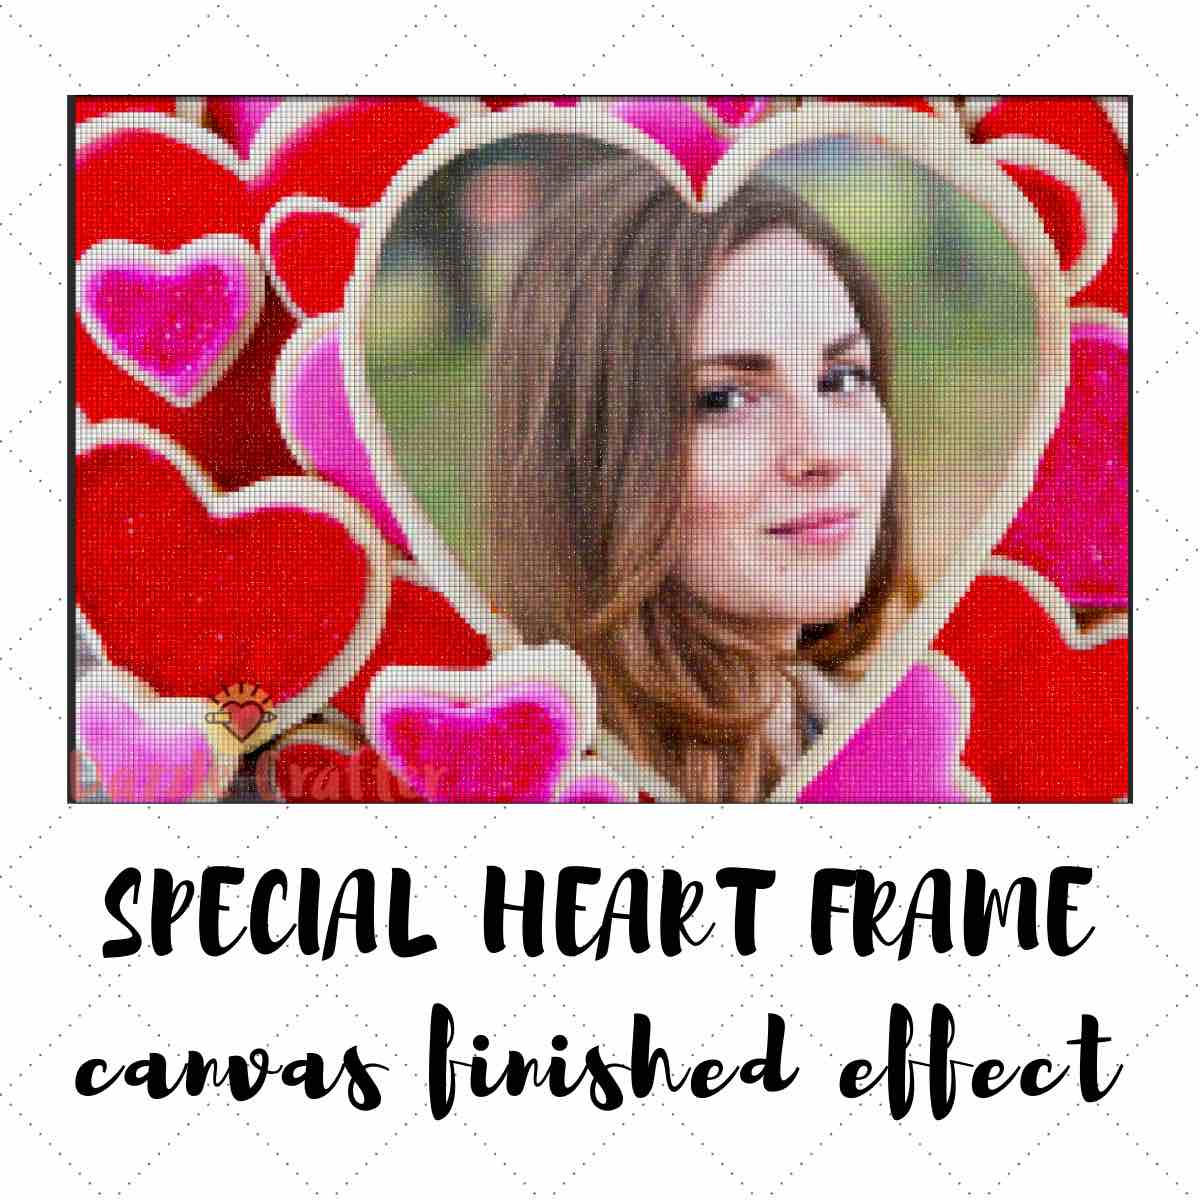 CUSTOM PHOTO WITH SPECIAL HEART FRAME - MAKE YOUR OWN DIAMOND PAINTING